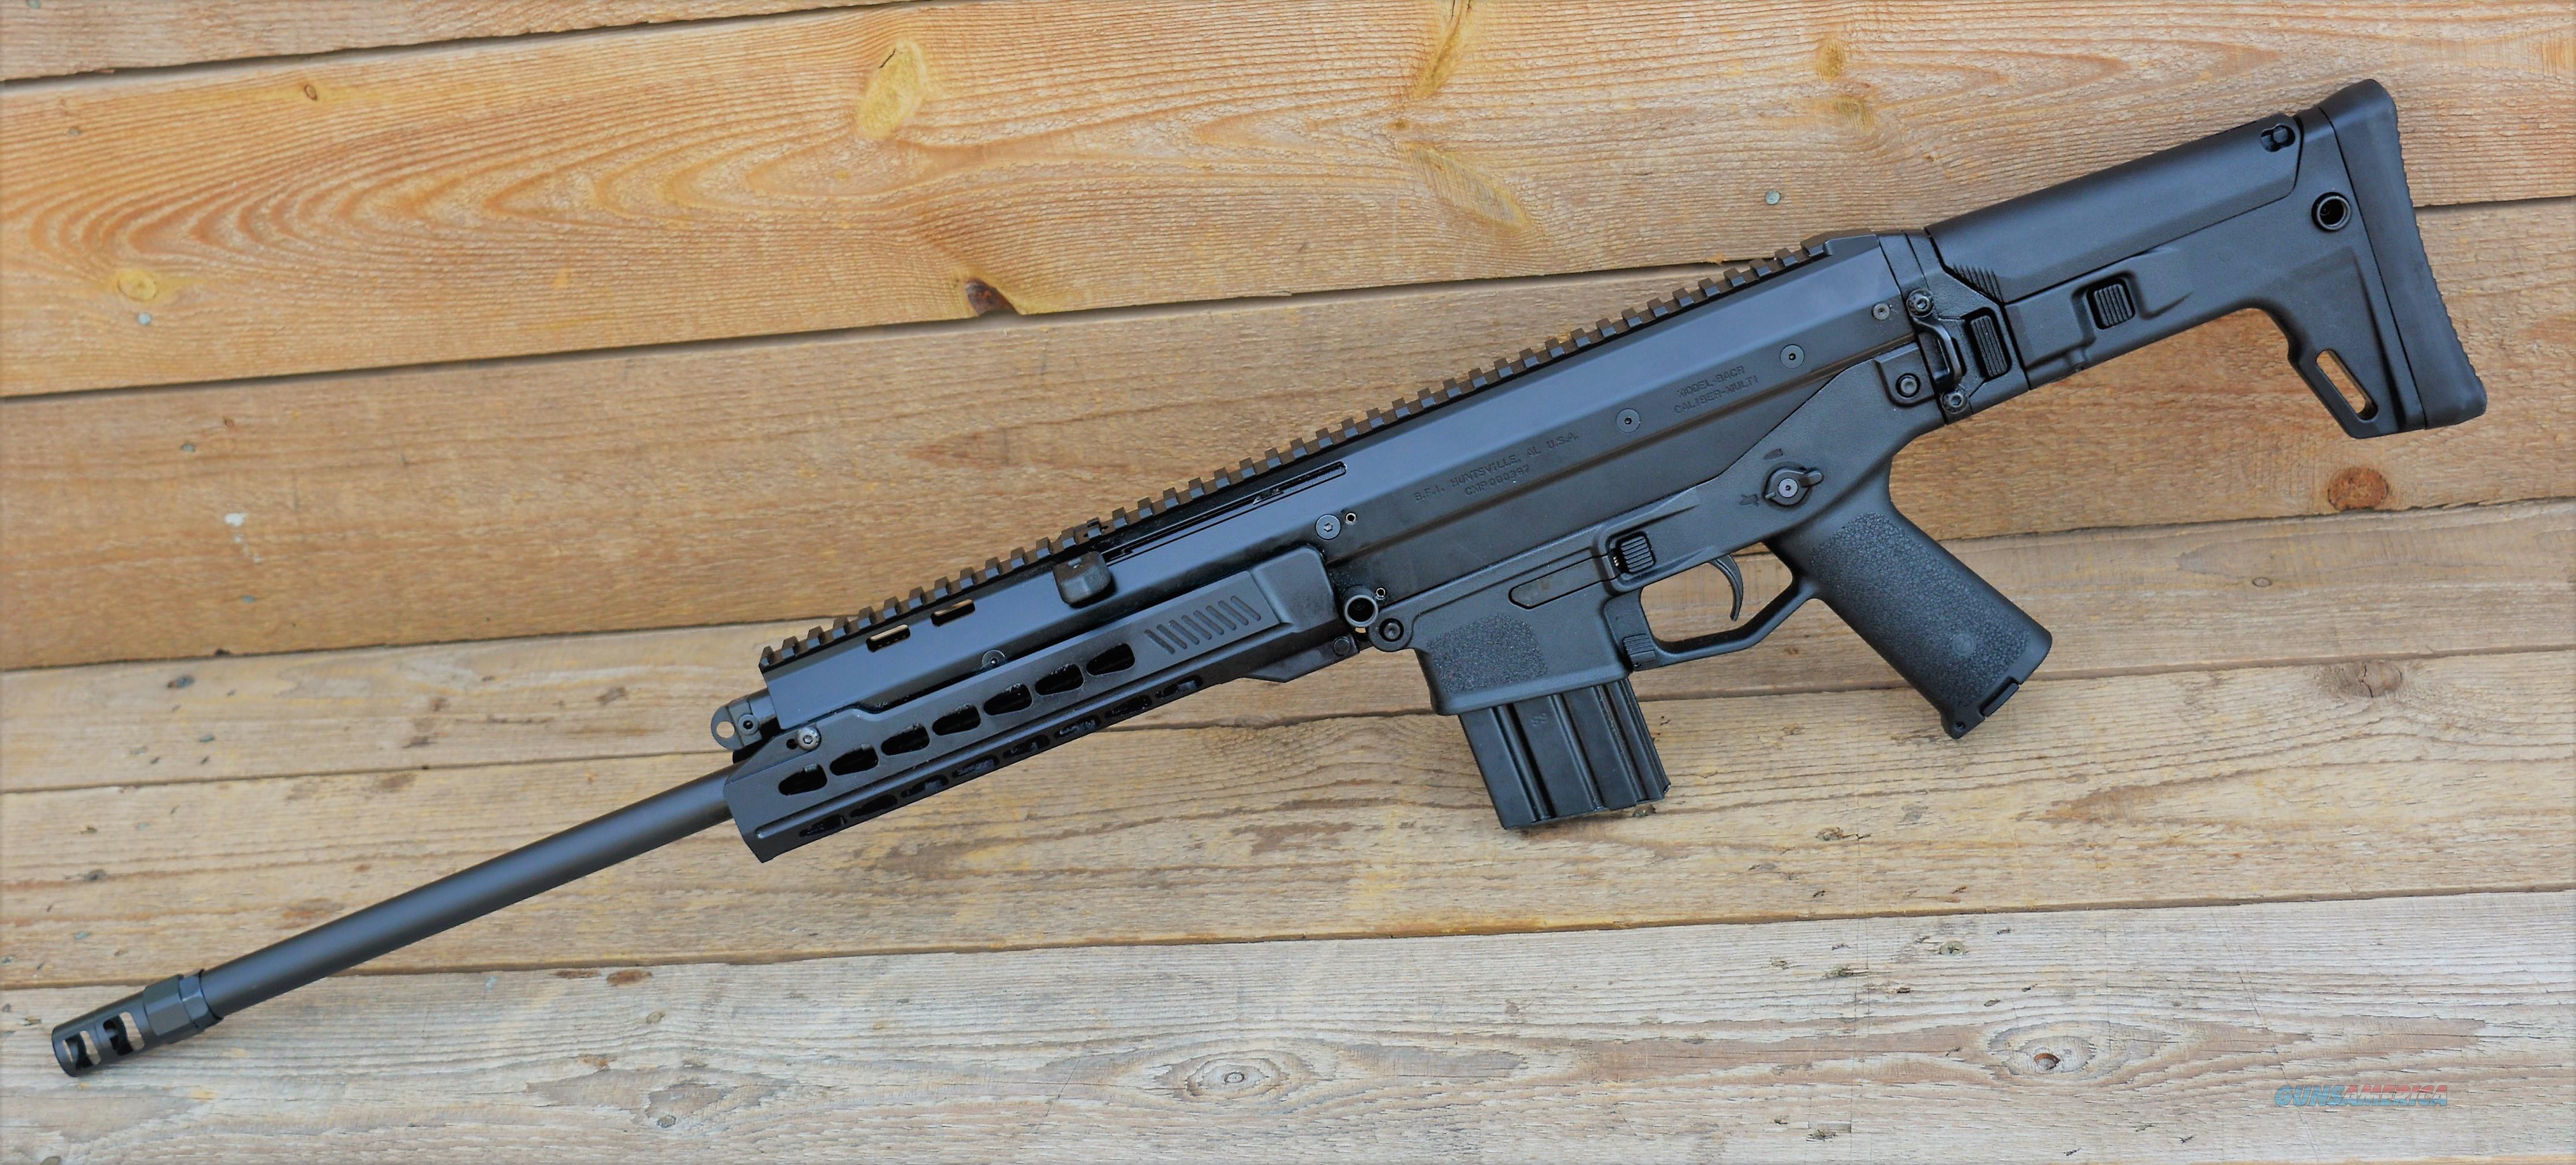 102 Easy Pay Bushmaster Acr In 450 For Sale At